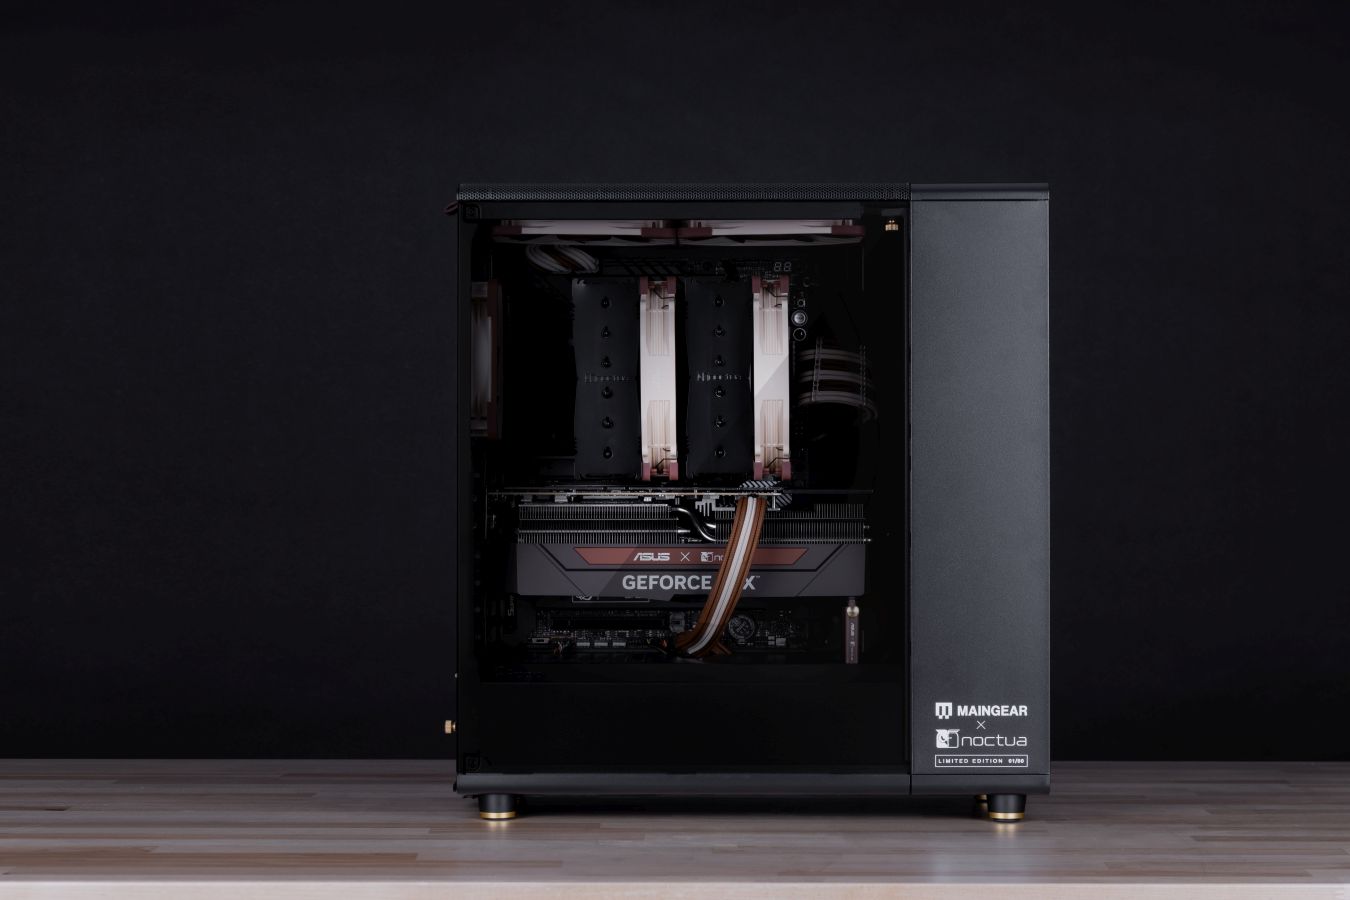 MAINGEAR Launches Fractal North Series with Noctua, Configurations Abound!  — GAMINGTREND